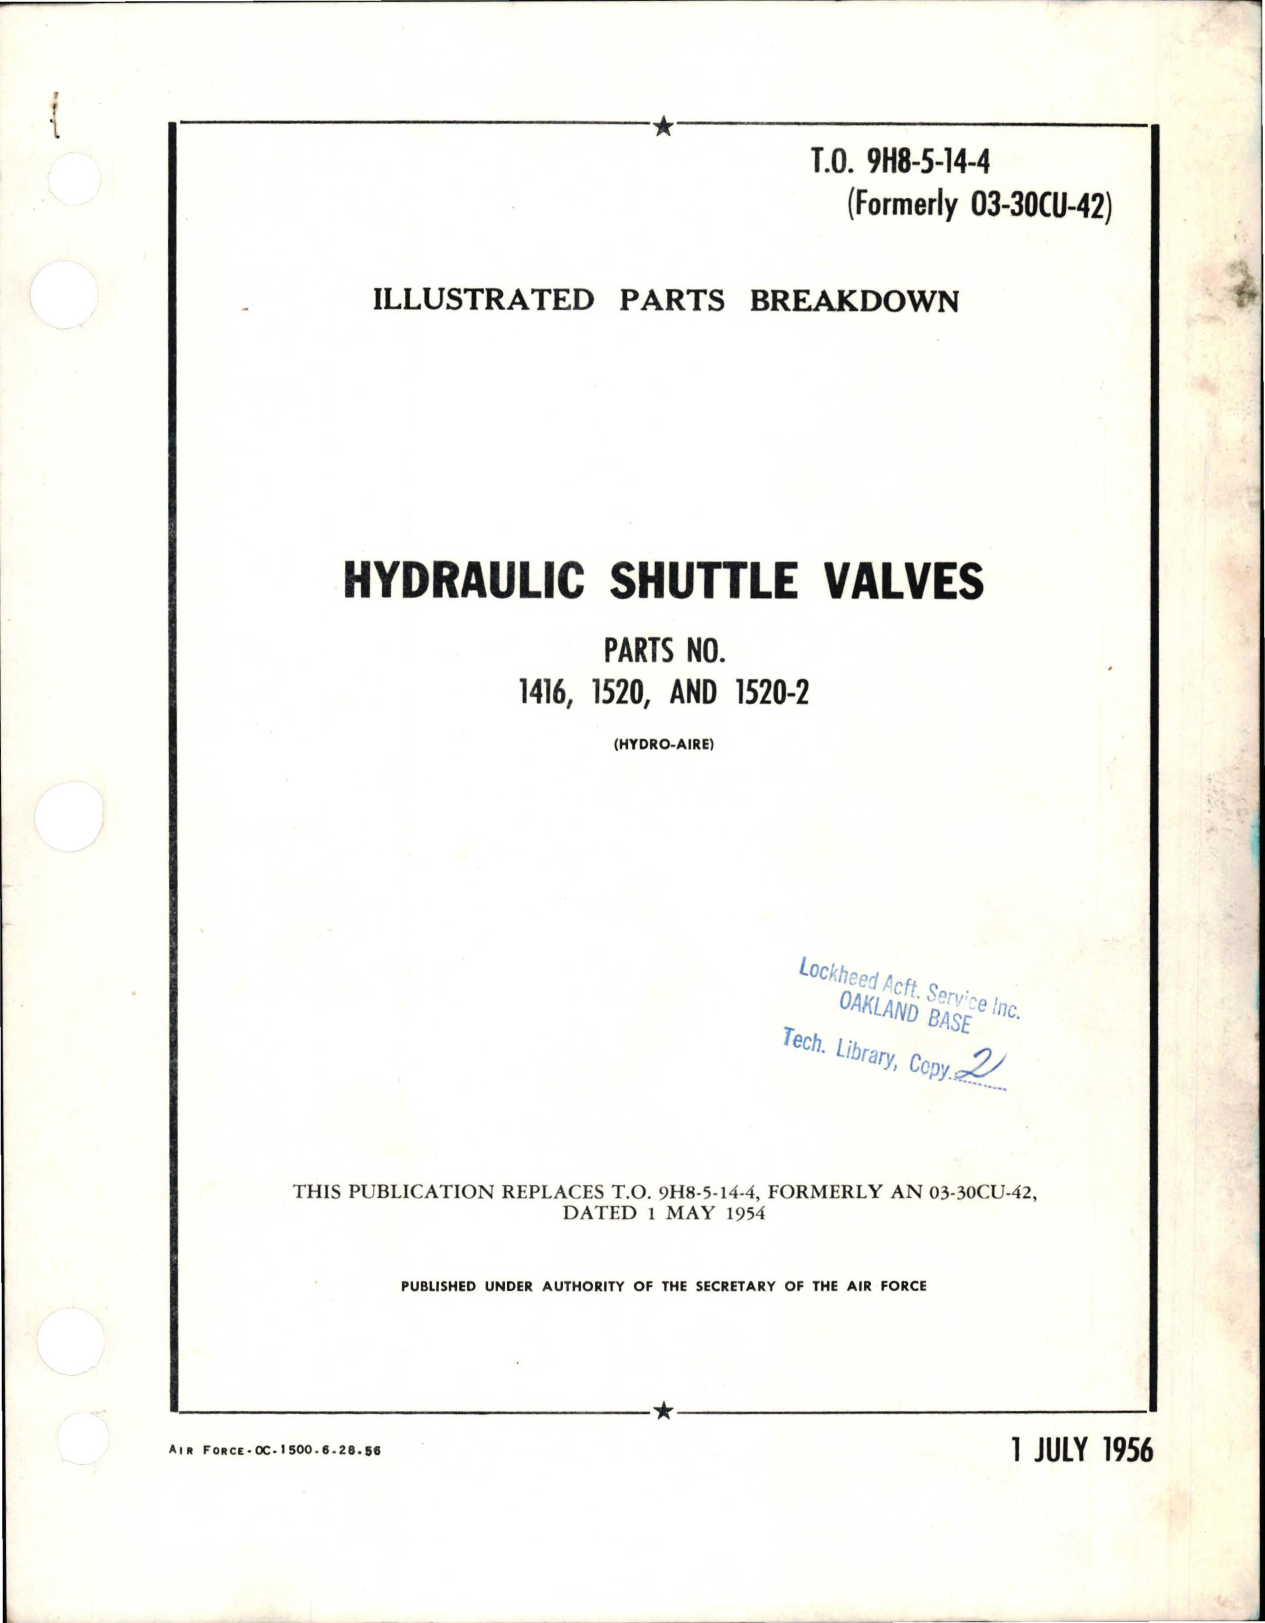 Sample page 1 from AirCorps Library document: Illustrated Parts Breakdown for Hydraulic Shuttle Valves - Parts 1416, 1520, 1520-2 